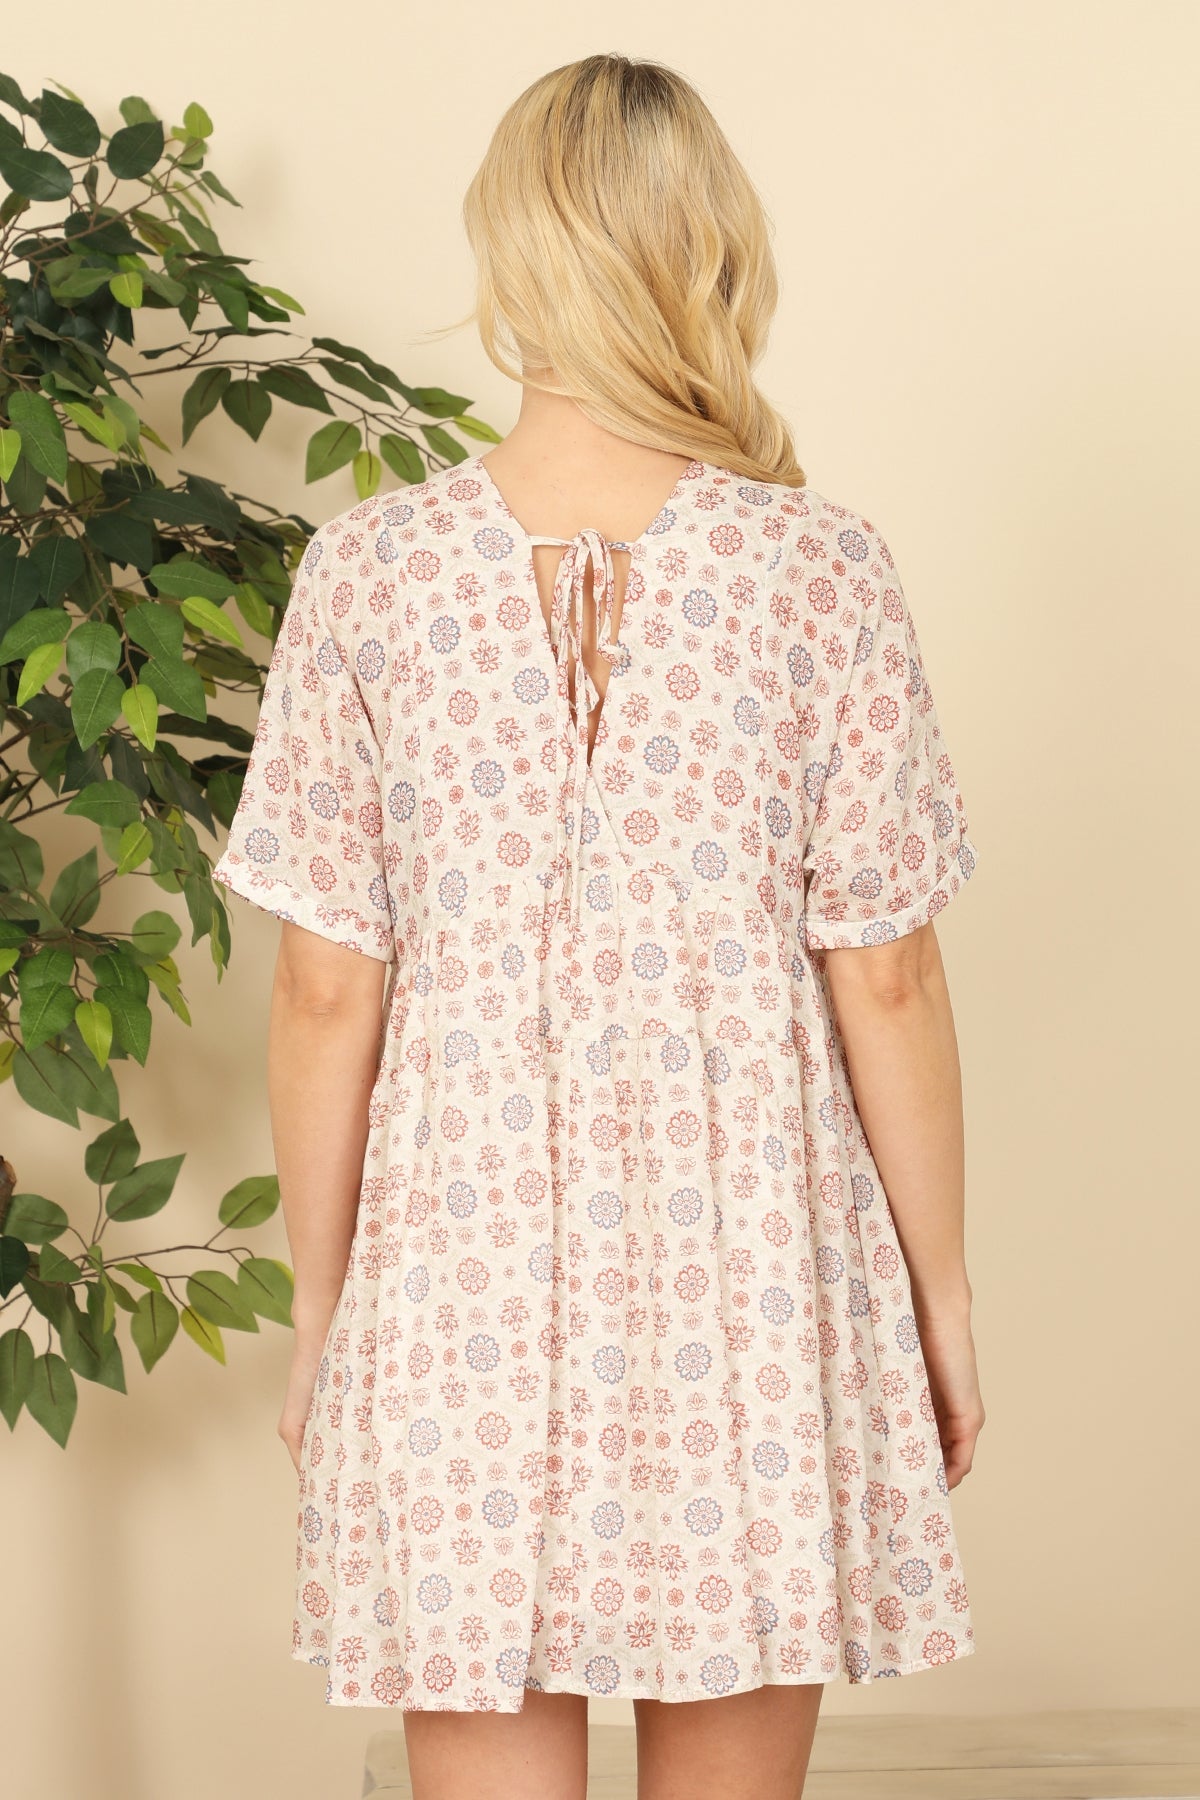 OATMEAL TOMATO V-NECK FLORAL MINI DRESS 3-2-1 (NOW $6.75 ONLY!)